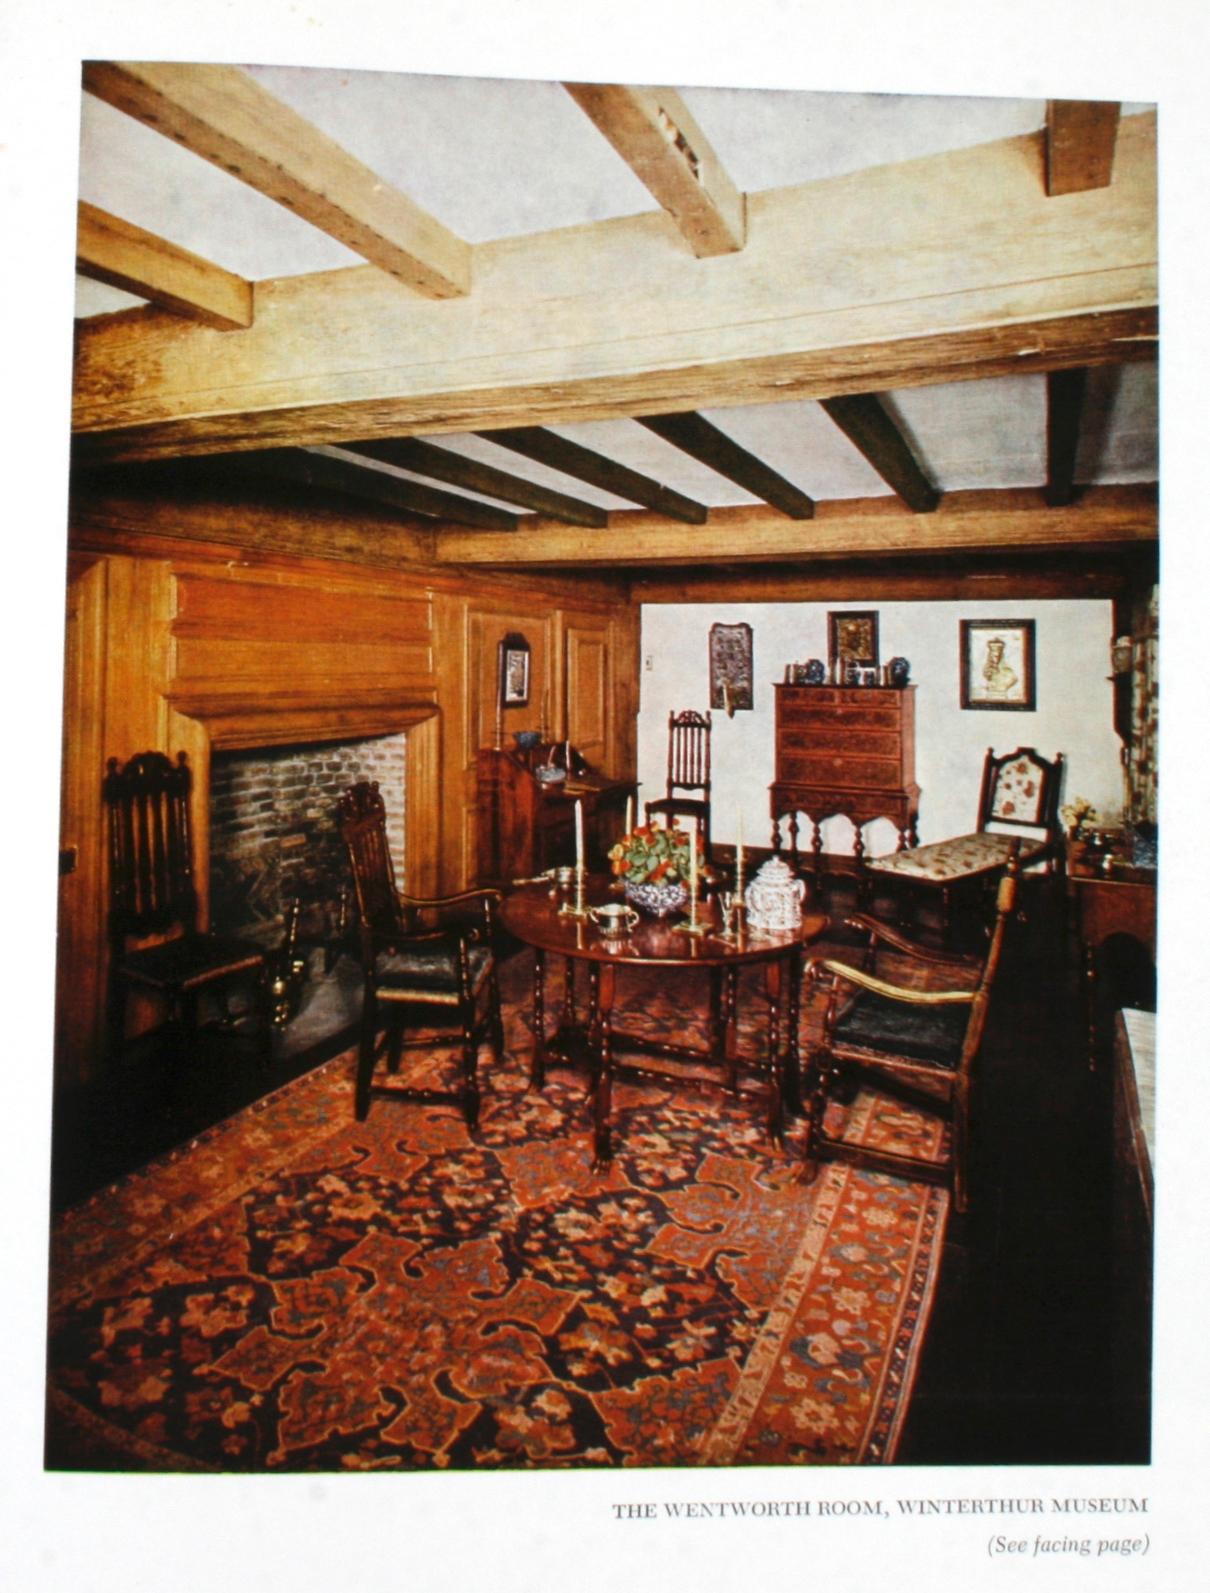 The Antiques Treasury of Furniture and Other Decorative Arts at Winterthur, Williamsburg, Sturbridge, Ford Museum, Cooperstown, Deerfield and Shelburne. New York: E.P. Dutton & Company, Inc., 1959. Hardcover with dust jacket. 320 pp. An in-depth